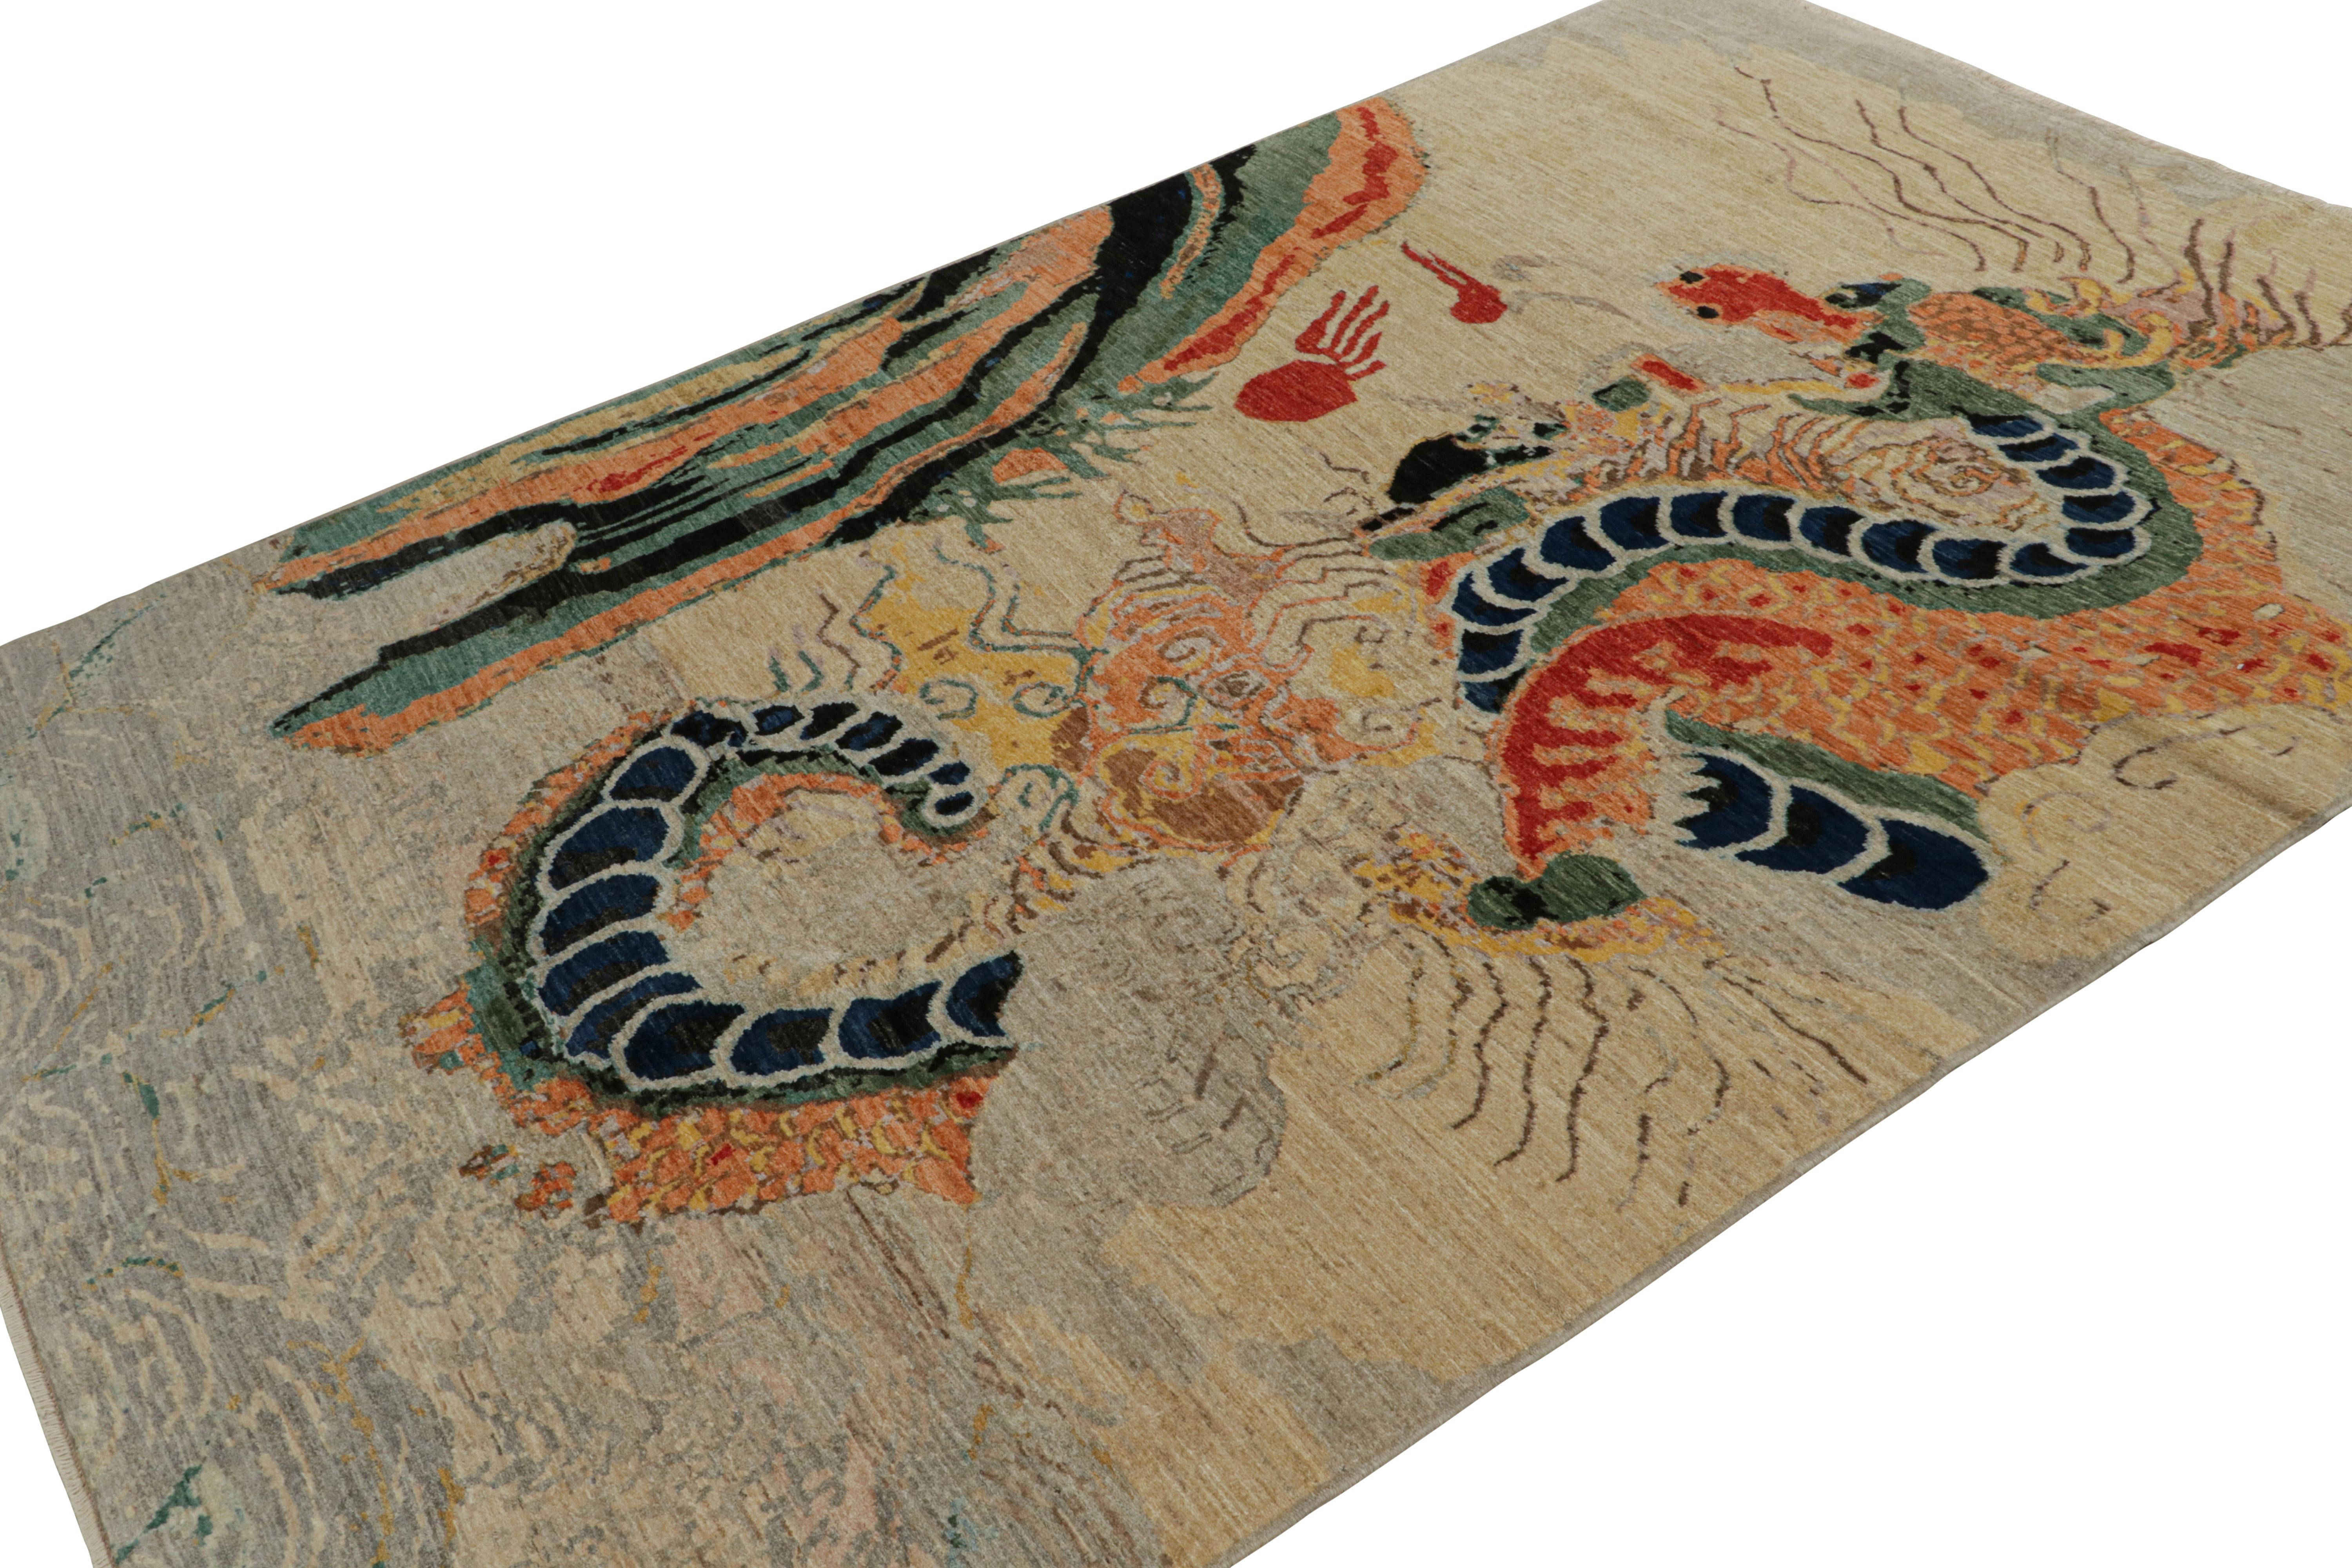 Hand-knotted in wool, this 6x9 modern rug, originating from Afghanistan, features a beige/brown field with an illustration of a dragon among the clouds. 

On the Design: 

Drawing inspiration from iconic antique Chinese pictorial dragon rugs, we